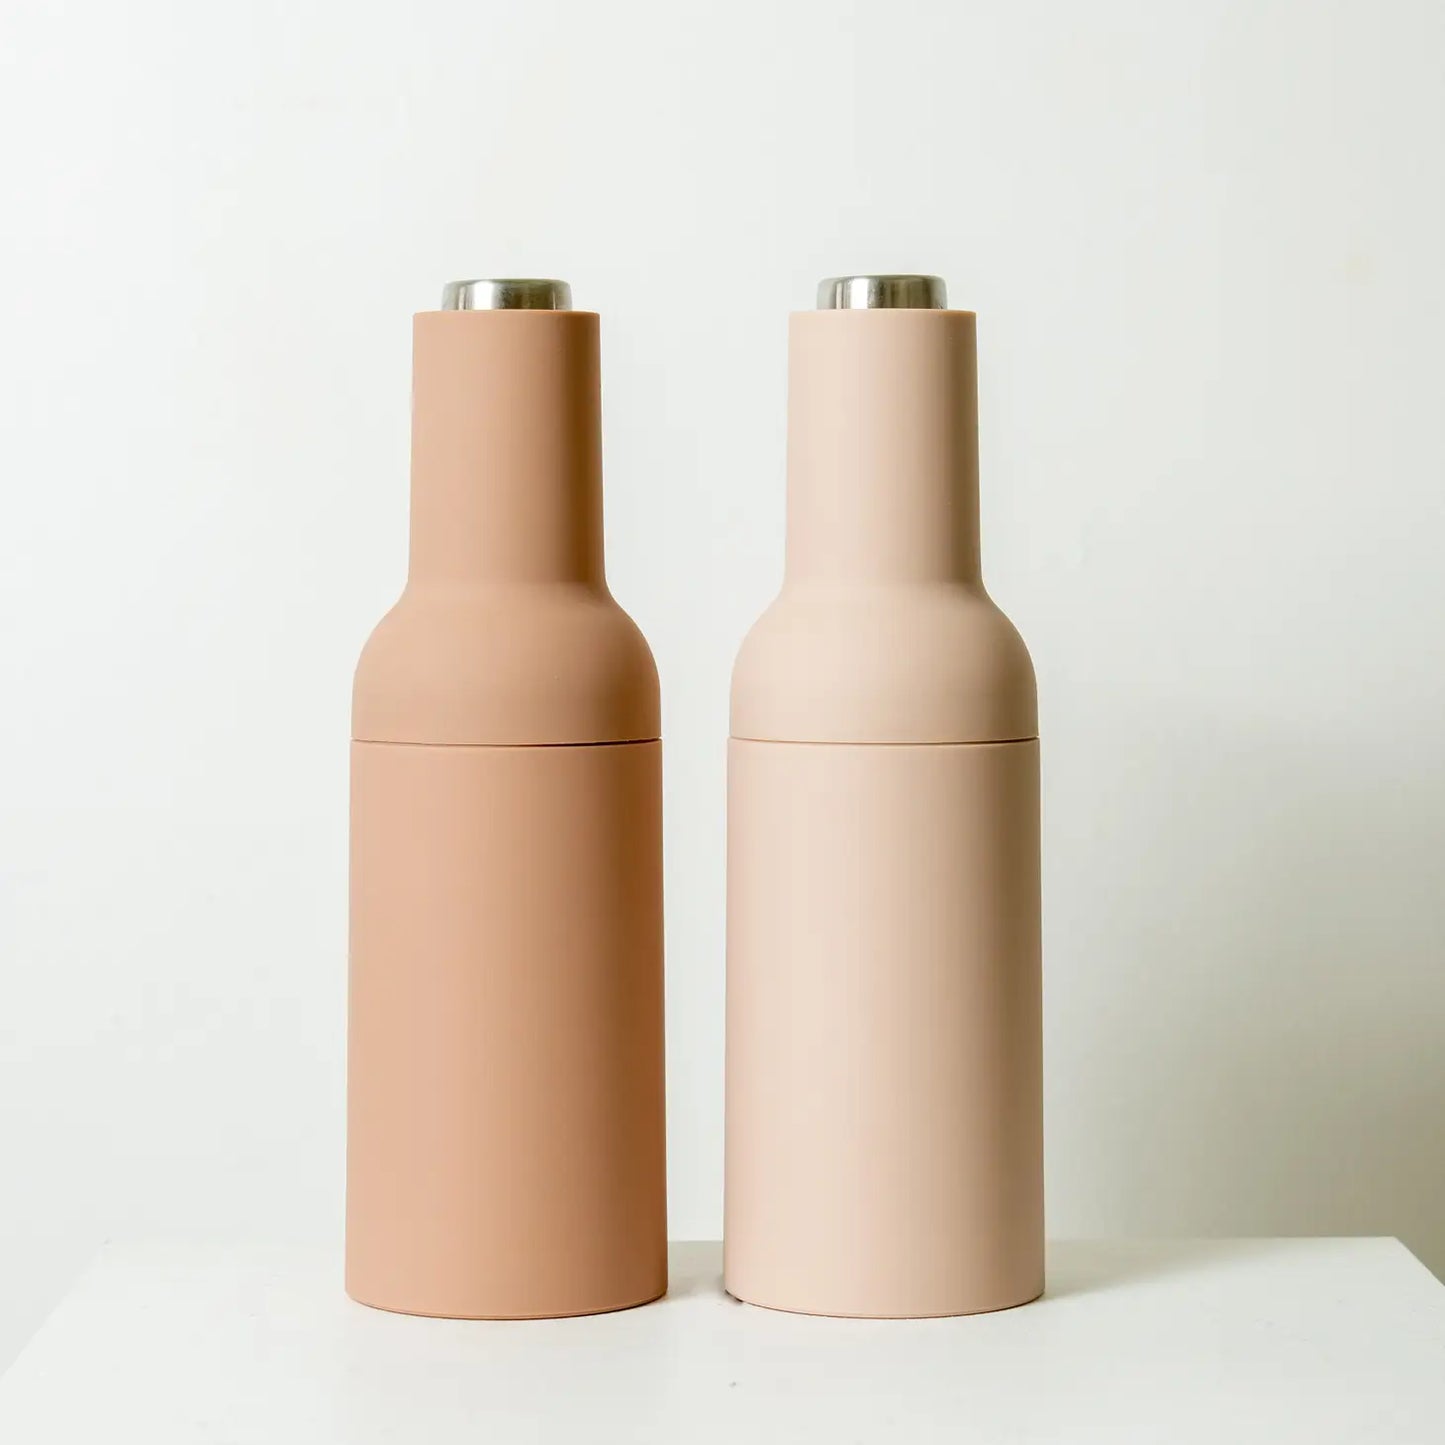 Thea Automatic S&P Grinders - Beige + Caramel